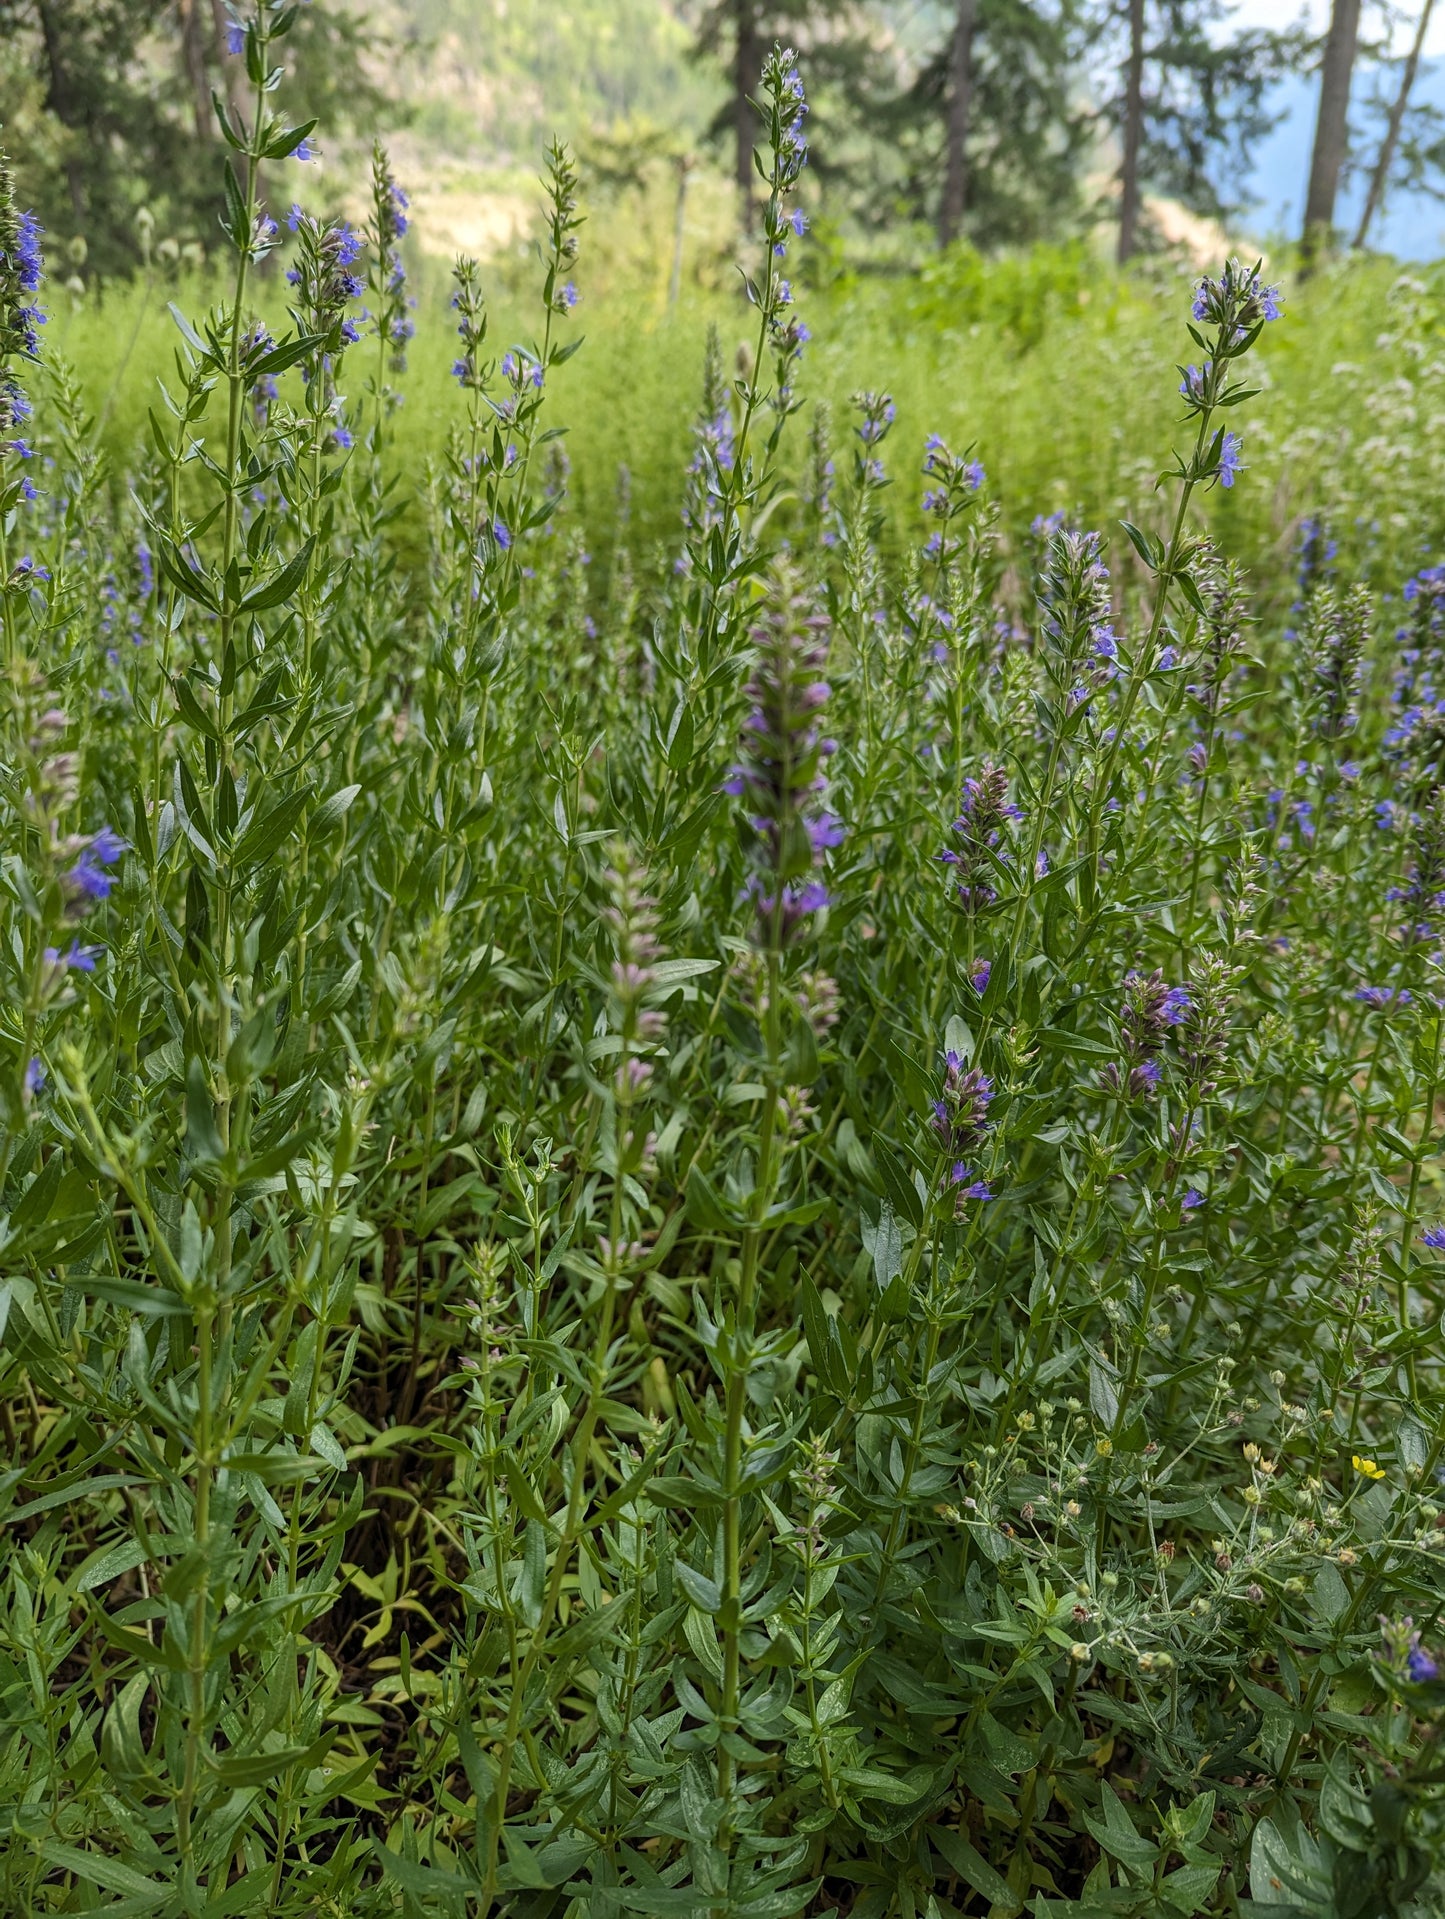 Organic Hyssop, Hyssopus officinalis, Sustainable Canadian Farm Grown Herbs